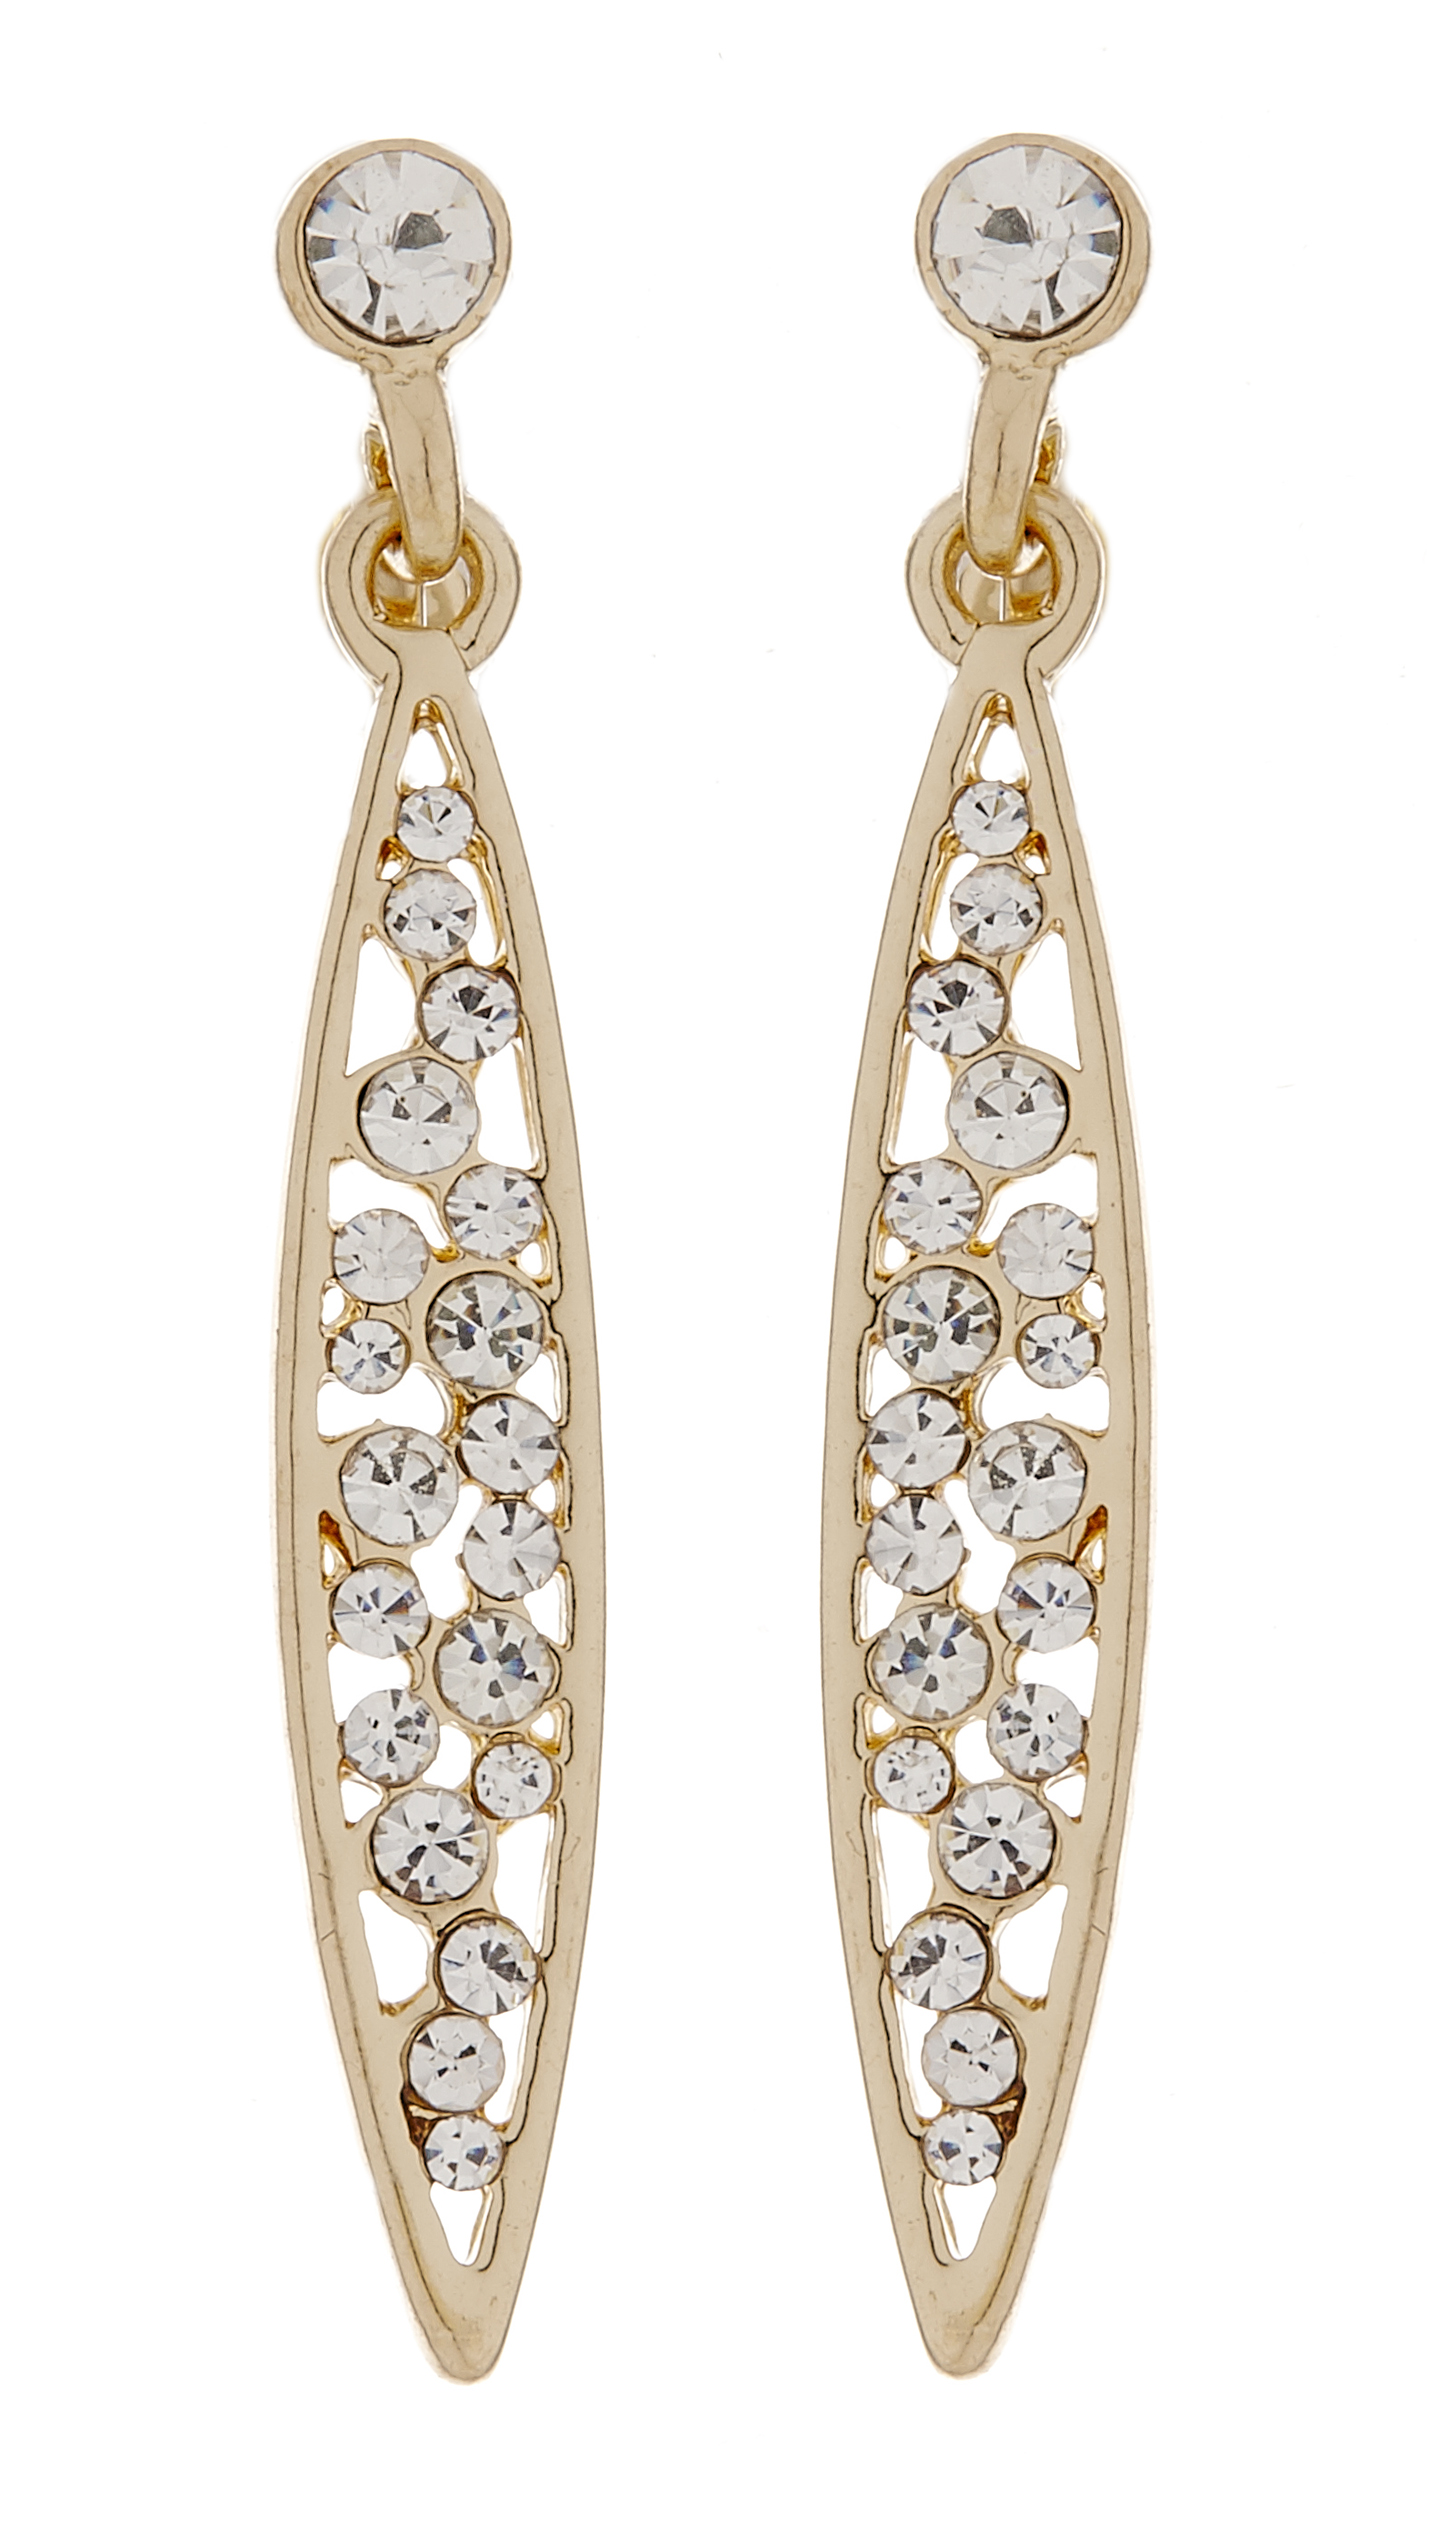 Clip On Earrings - Andie - gold drop earring with clear crystals